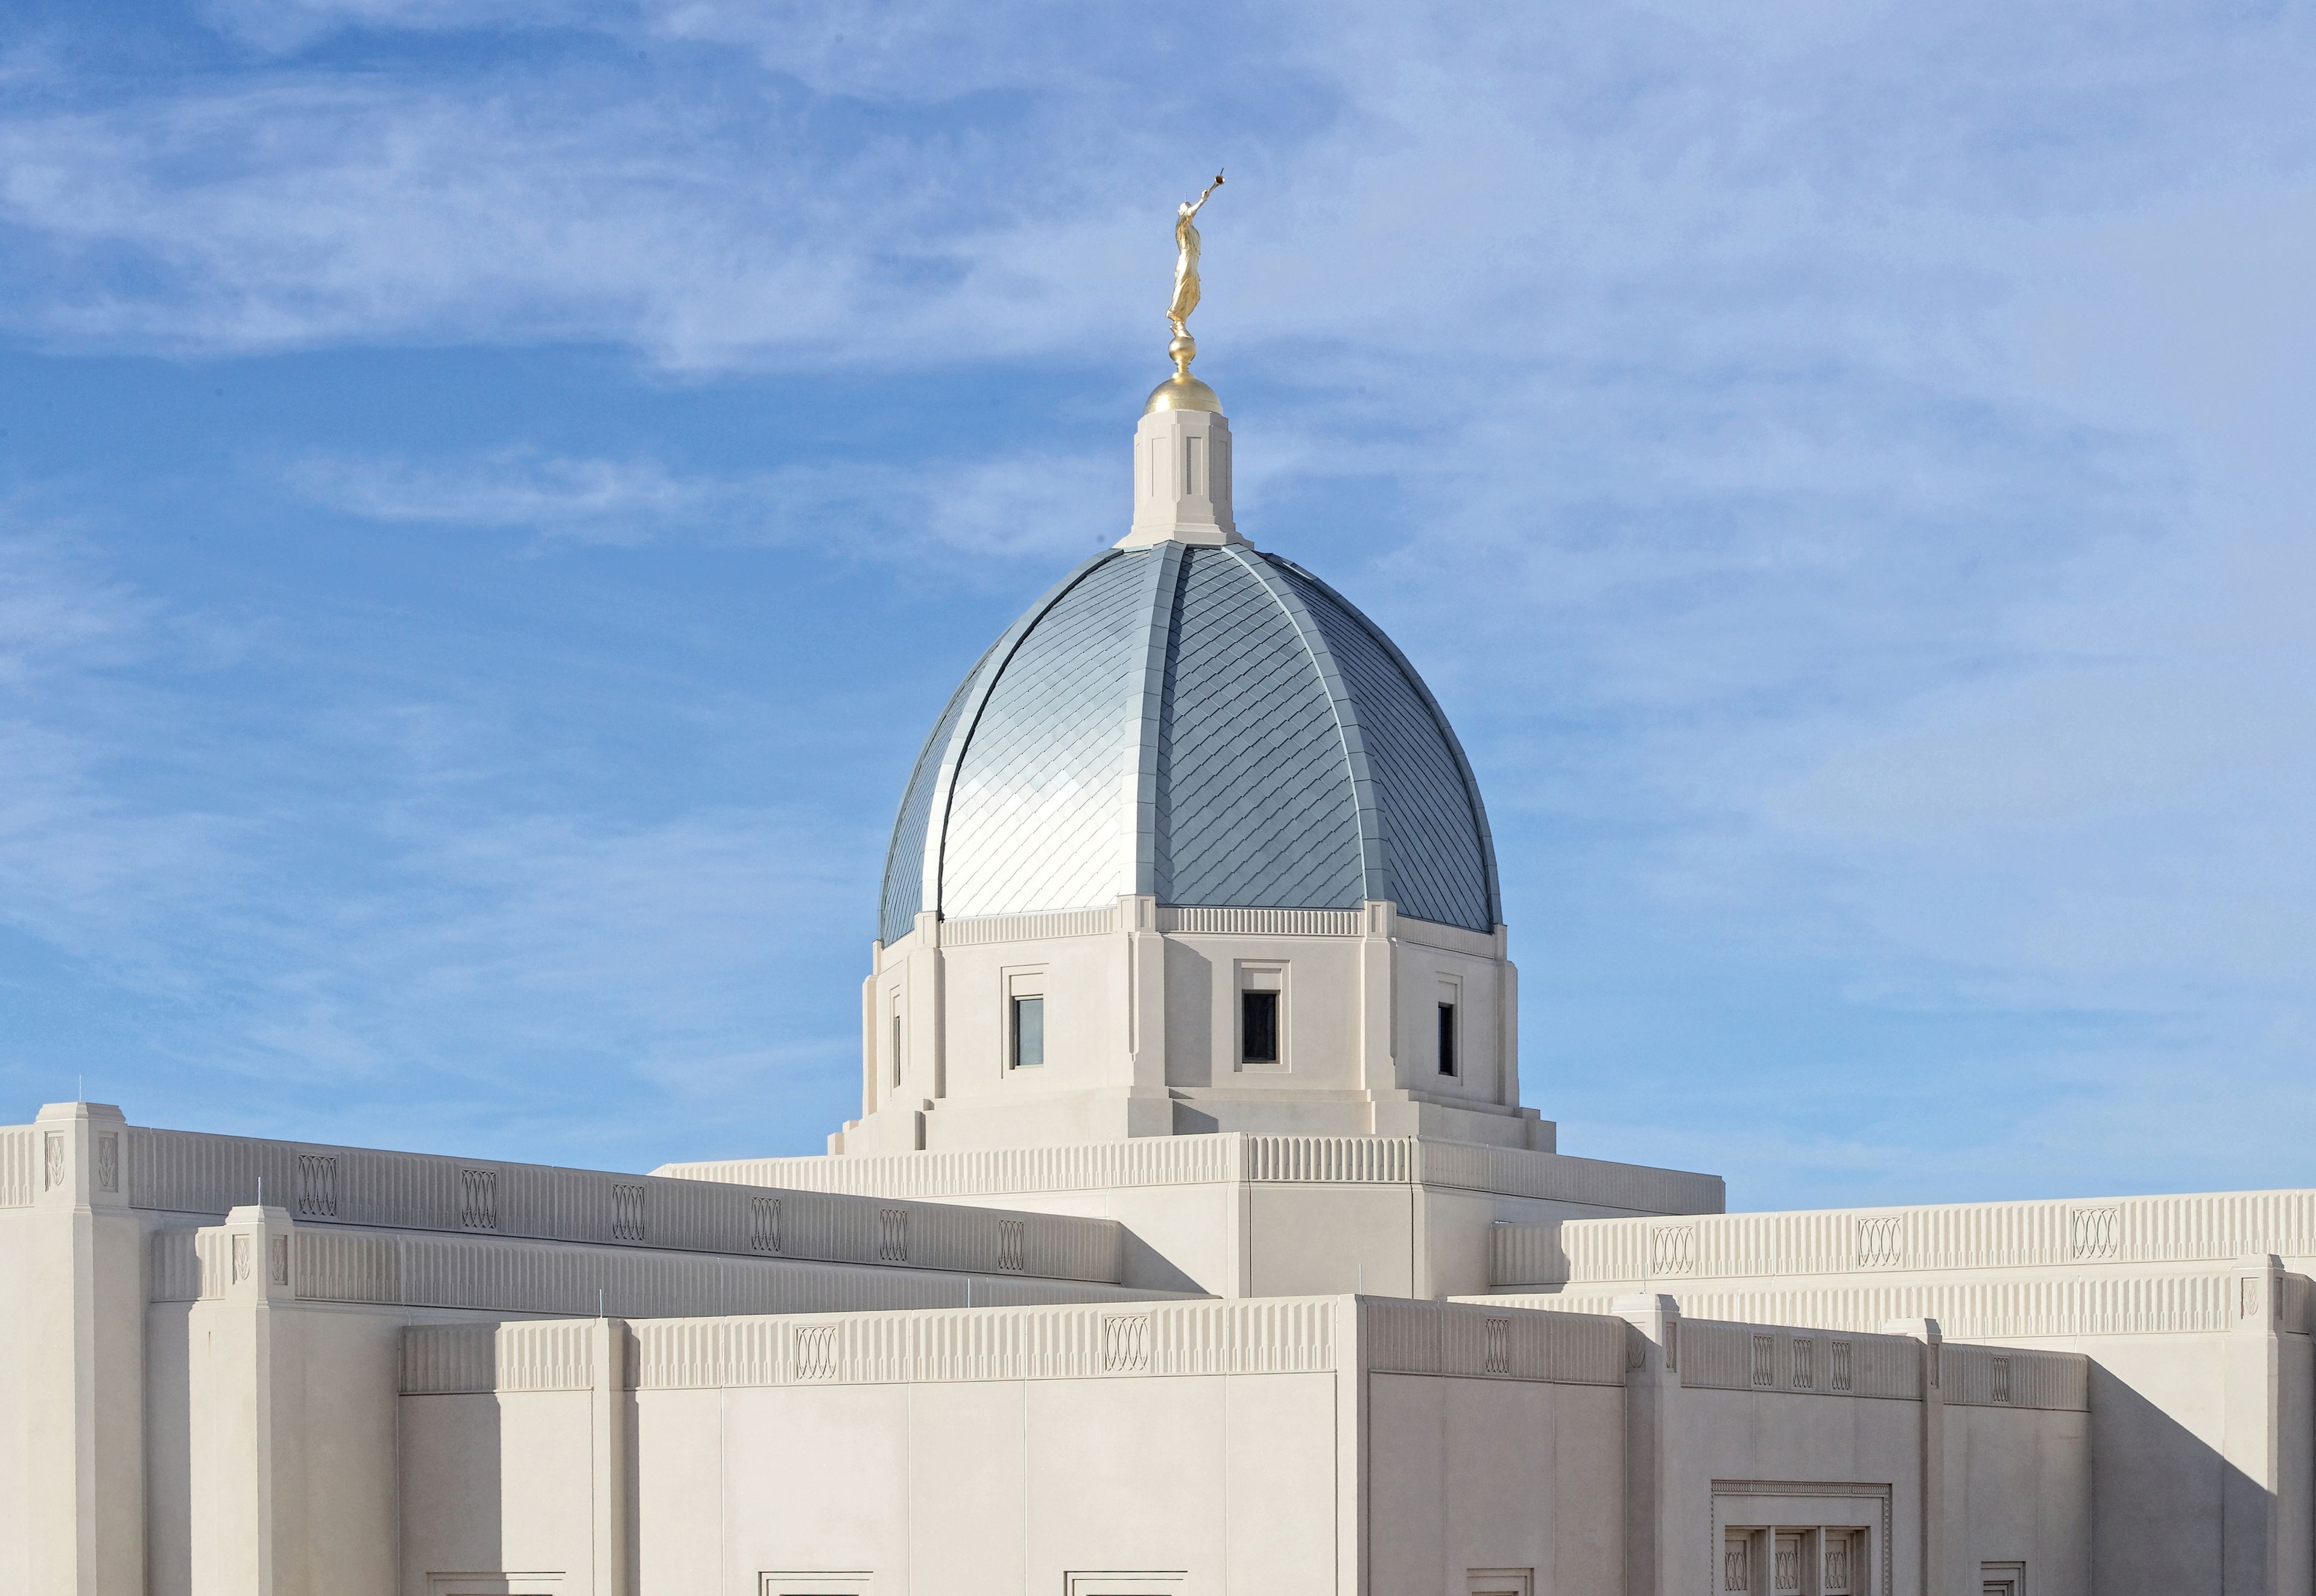 A photograph of the top of the Tucson Arizona Temple against a blue sky.